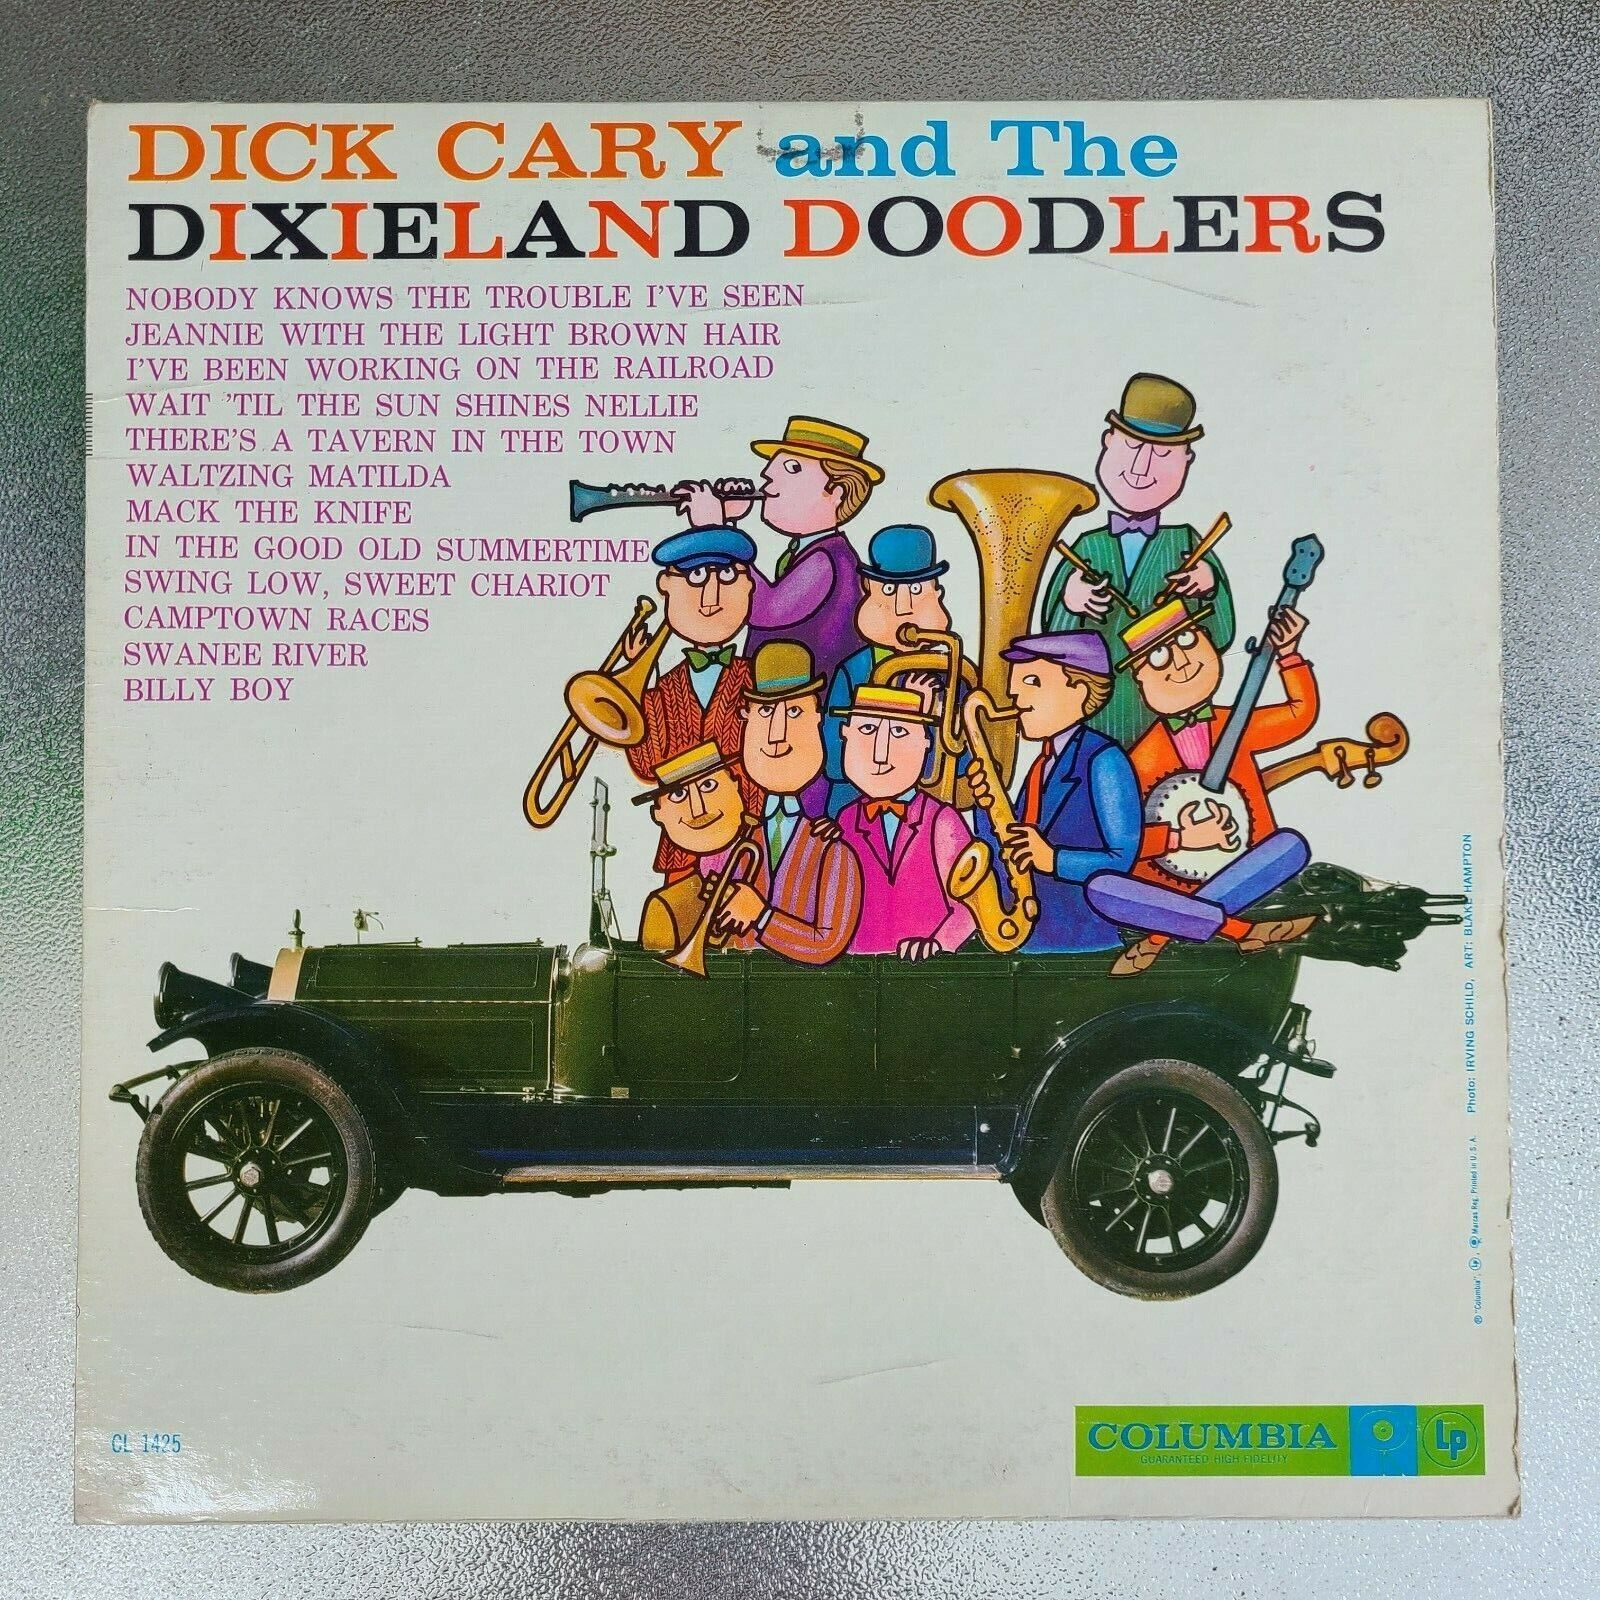 Dick Cary and The Dixieland Doodlers - Vinyl - Used